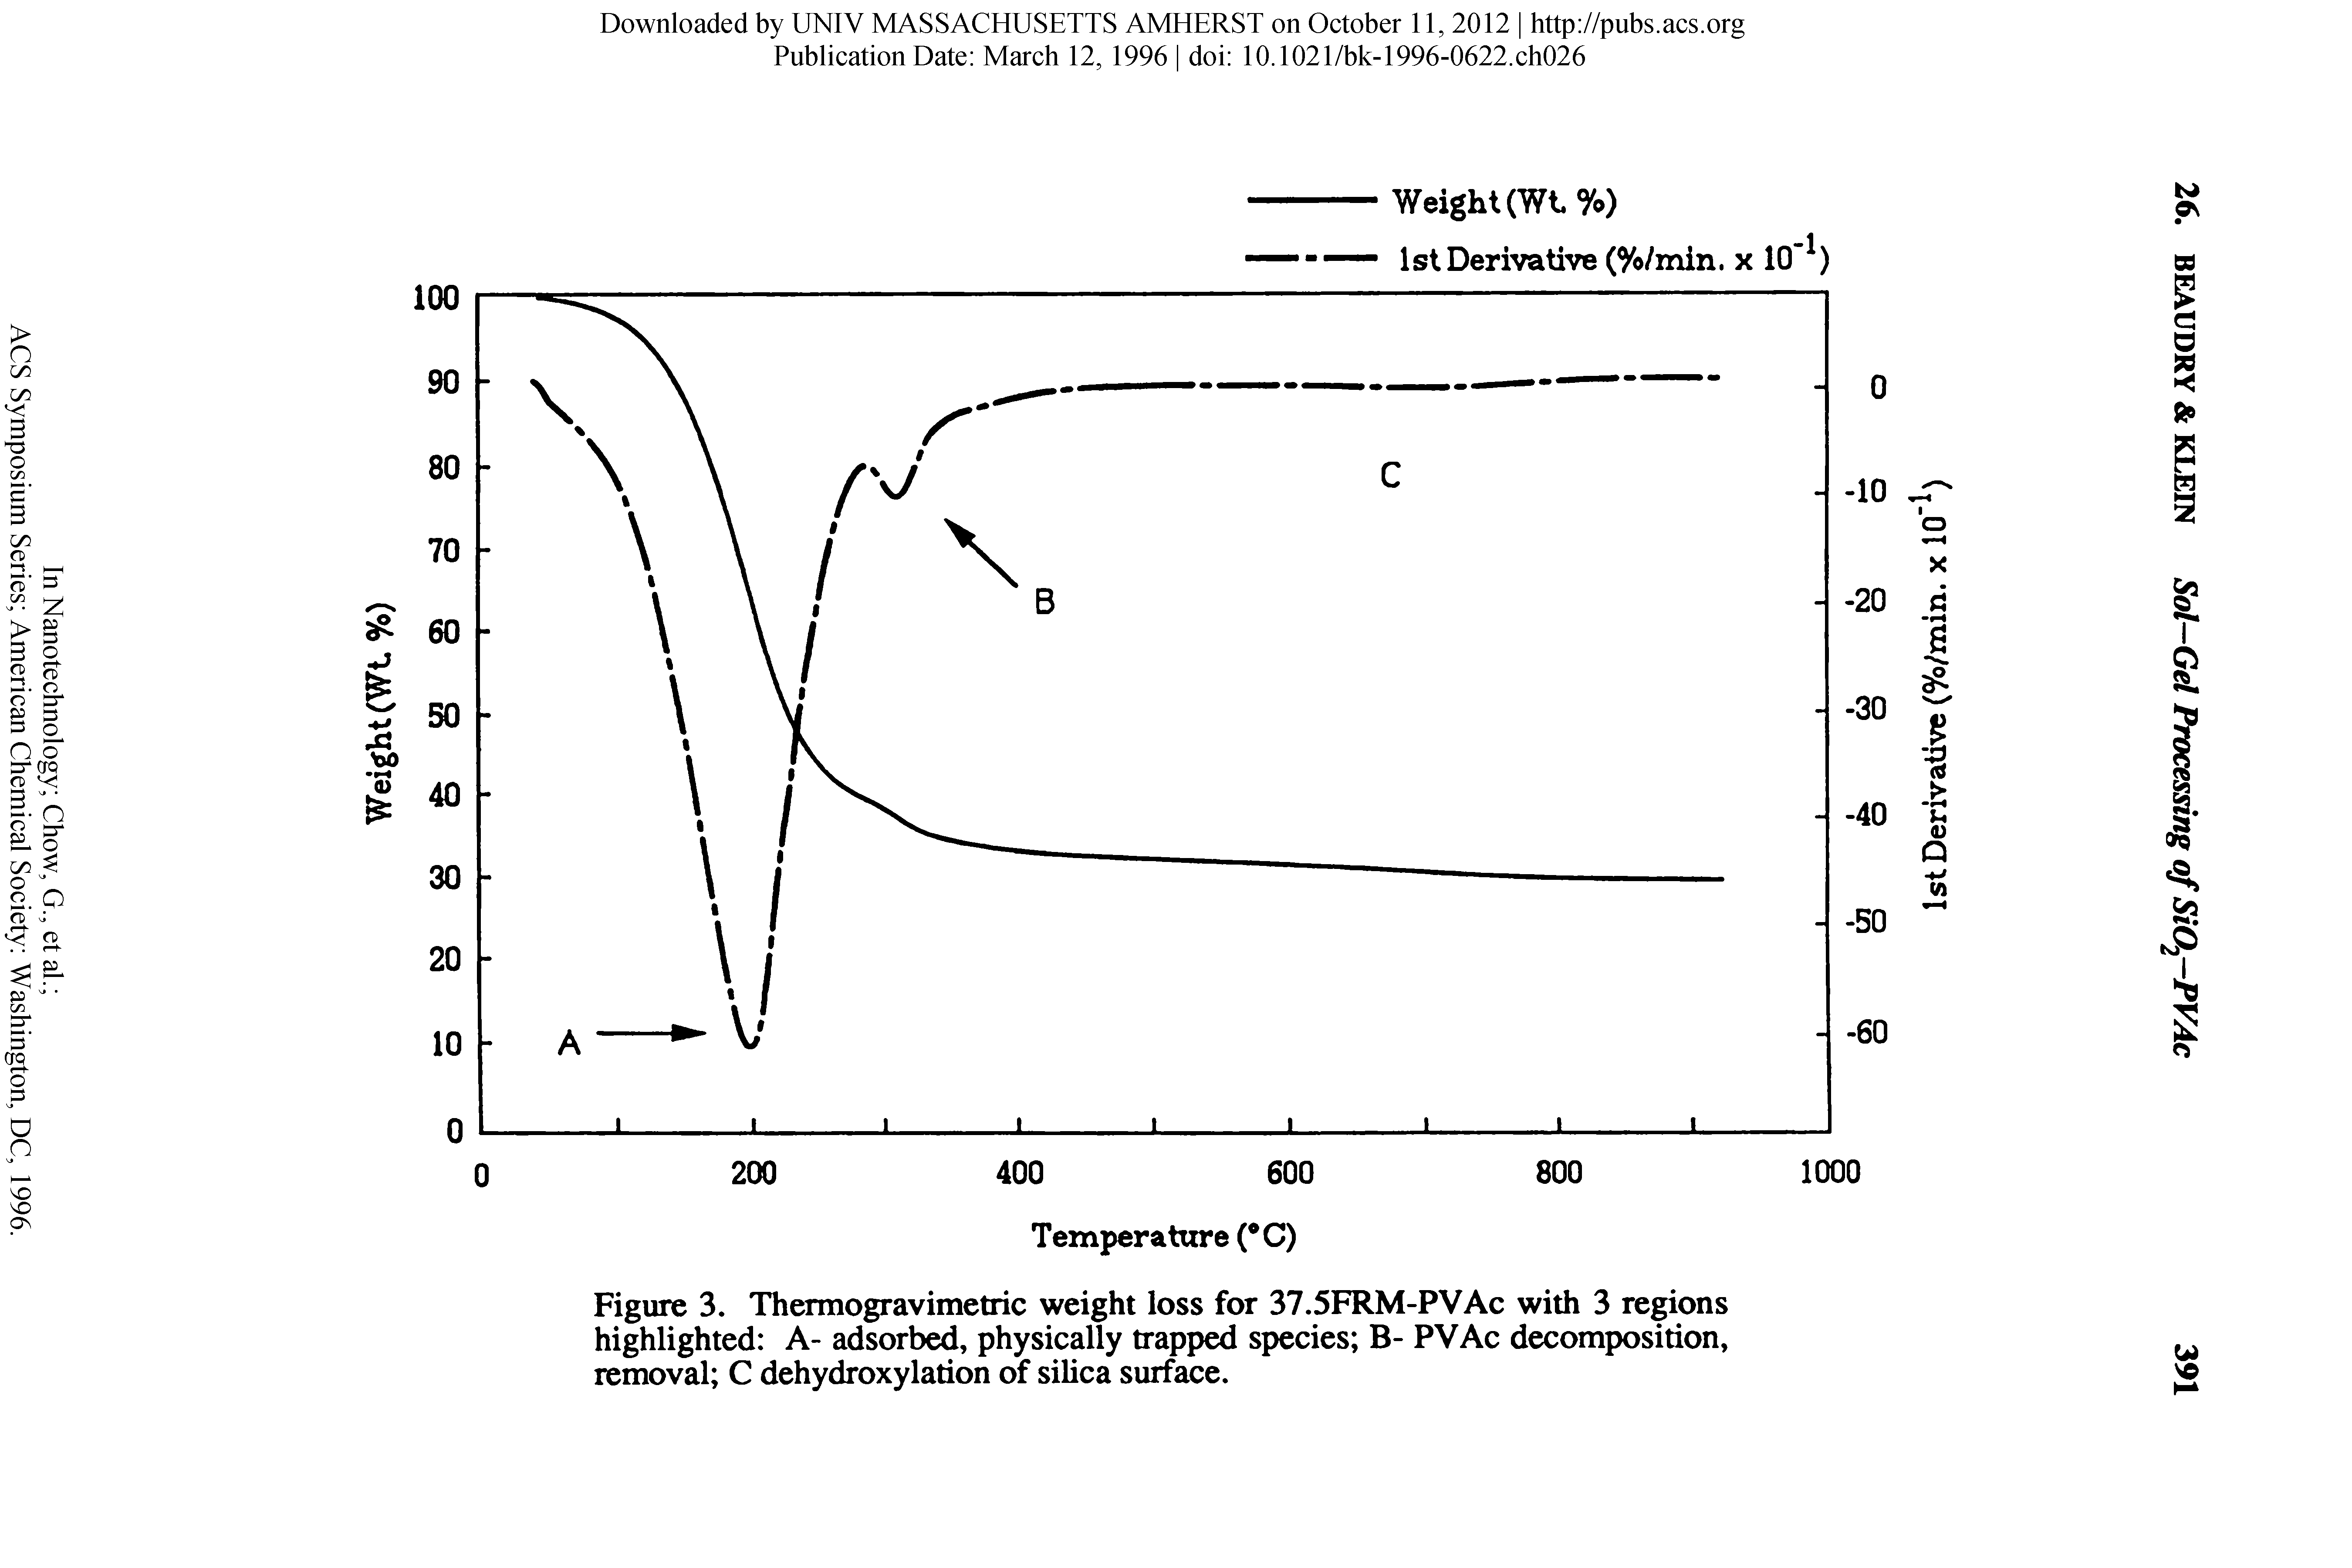 Figure 3. Thermogravimetric weight loss for 37.5FRM-PVAc with 3 regions highlighted A- adsorbed, physically trapped species B- PVAc decomposition, removal C dehydroxylation of silica surface.